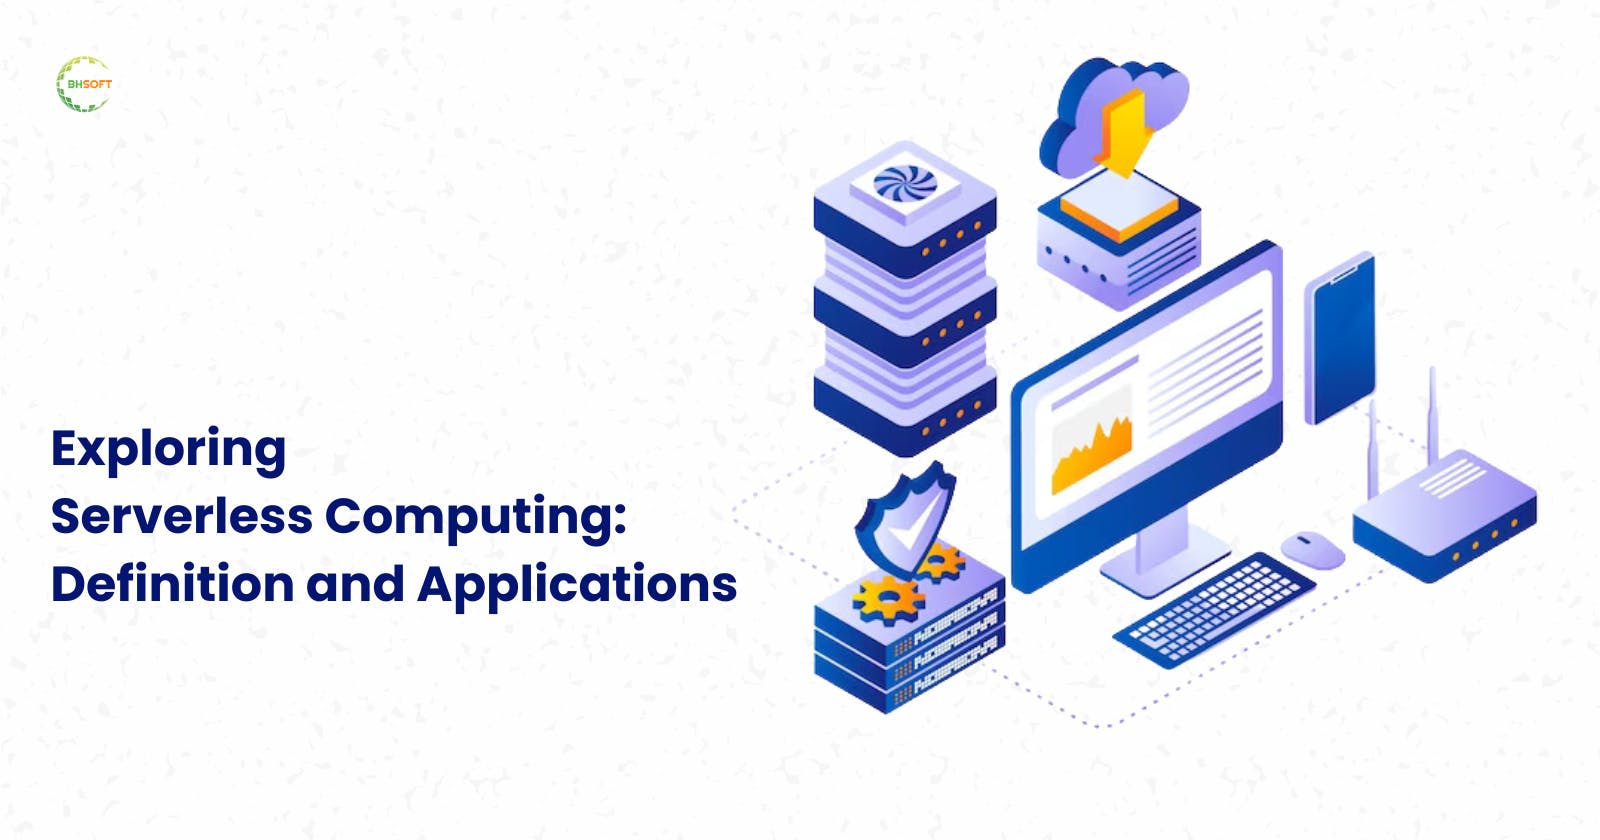 Exploring Serverless Computing: Definition and Applications